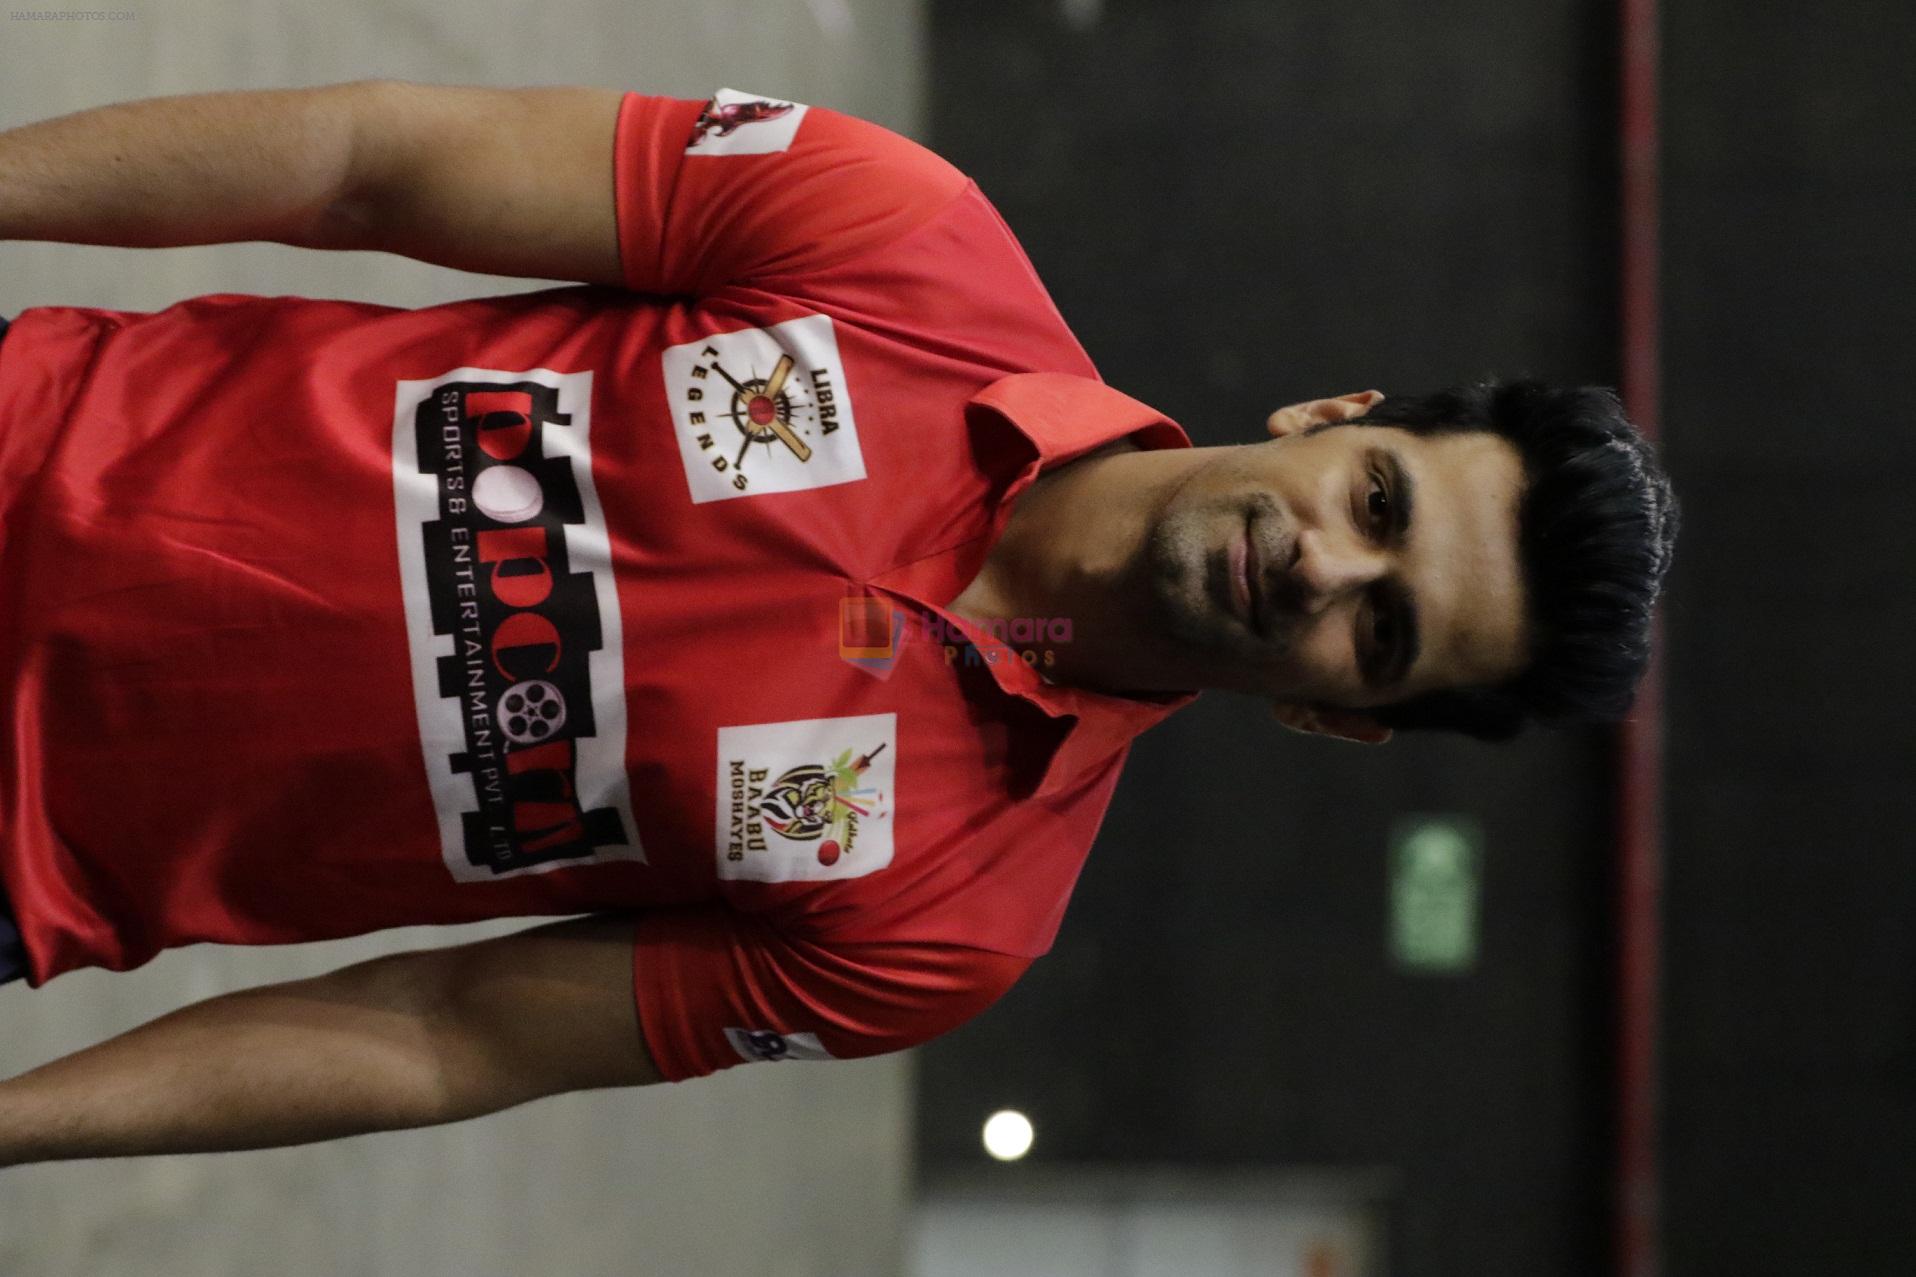 Anuj Sachdev at the BCL Season 2 Practice session on 17th Jan 2016